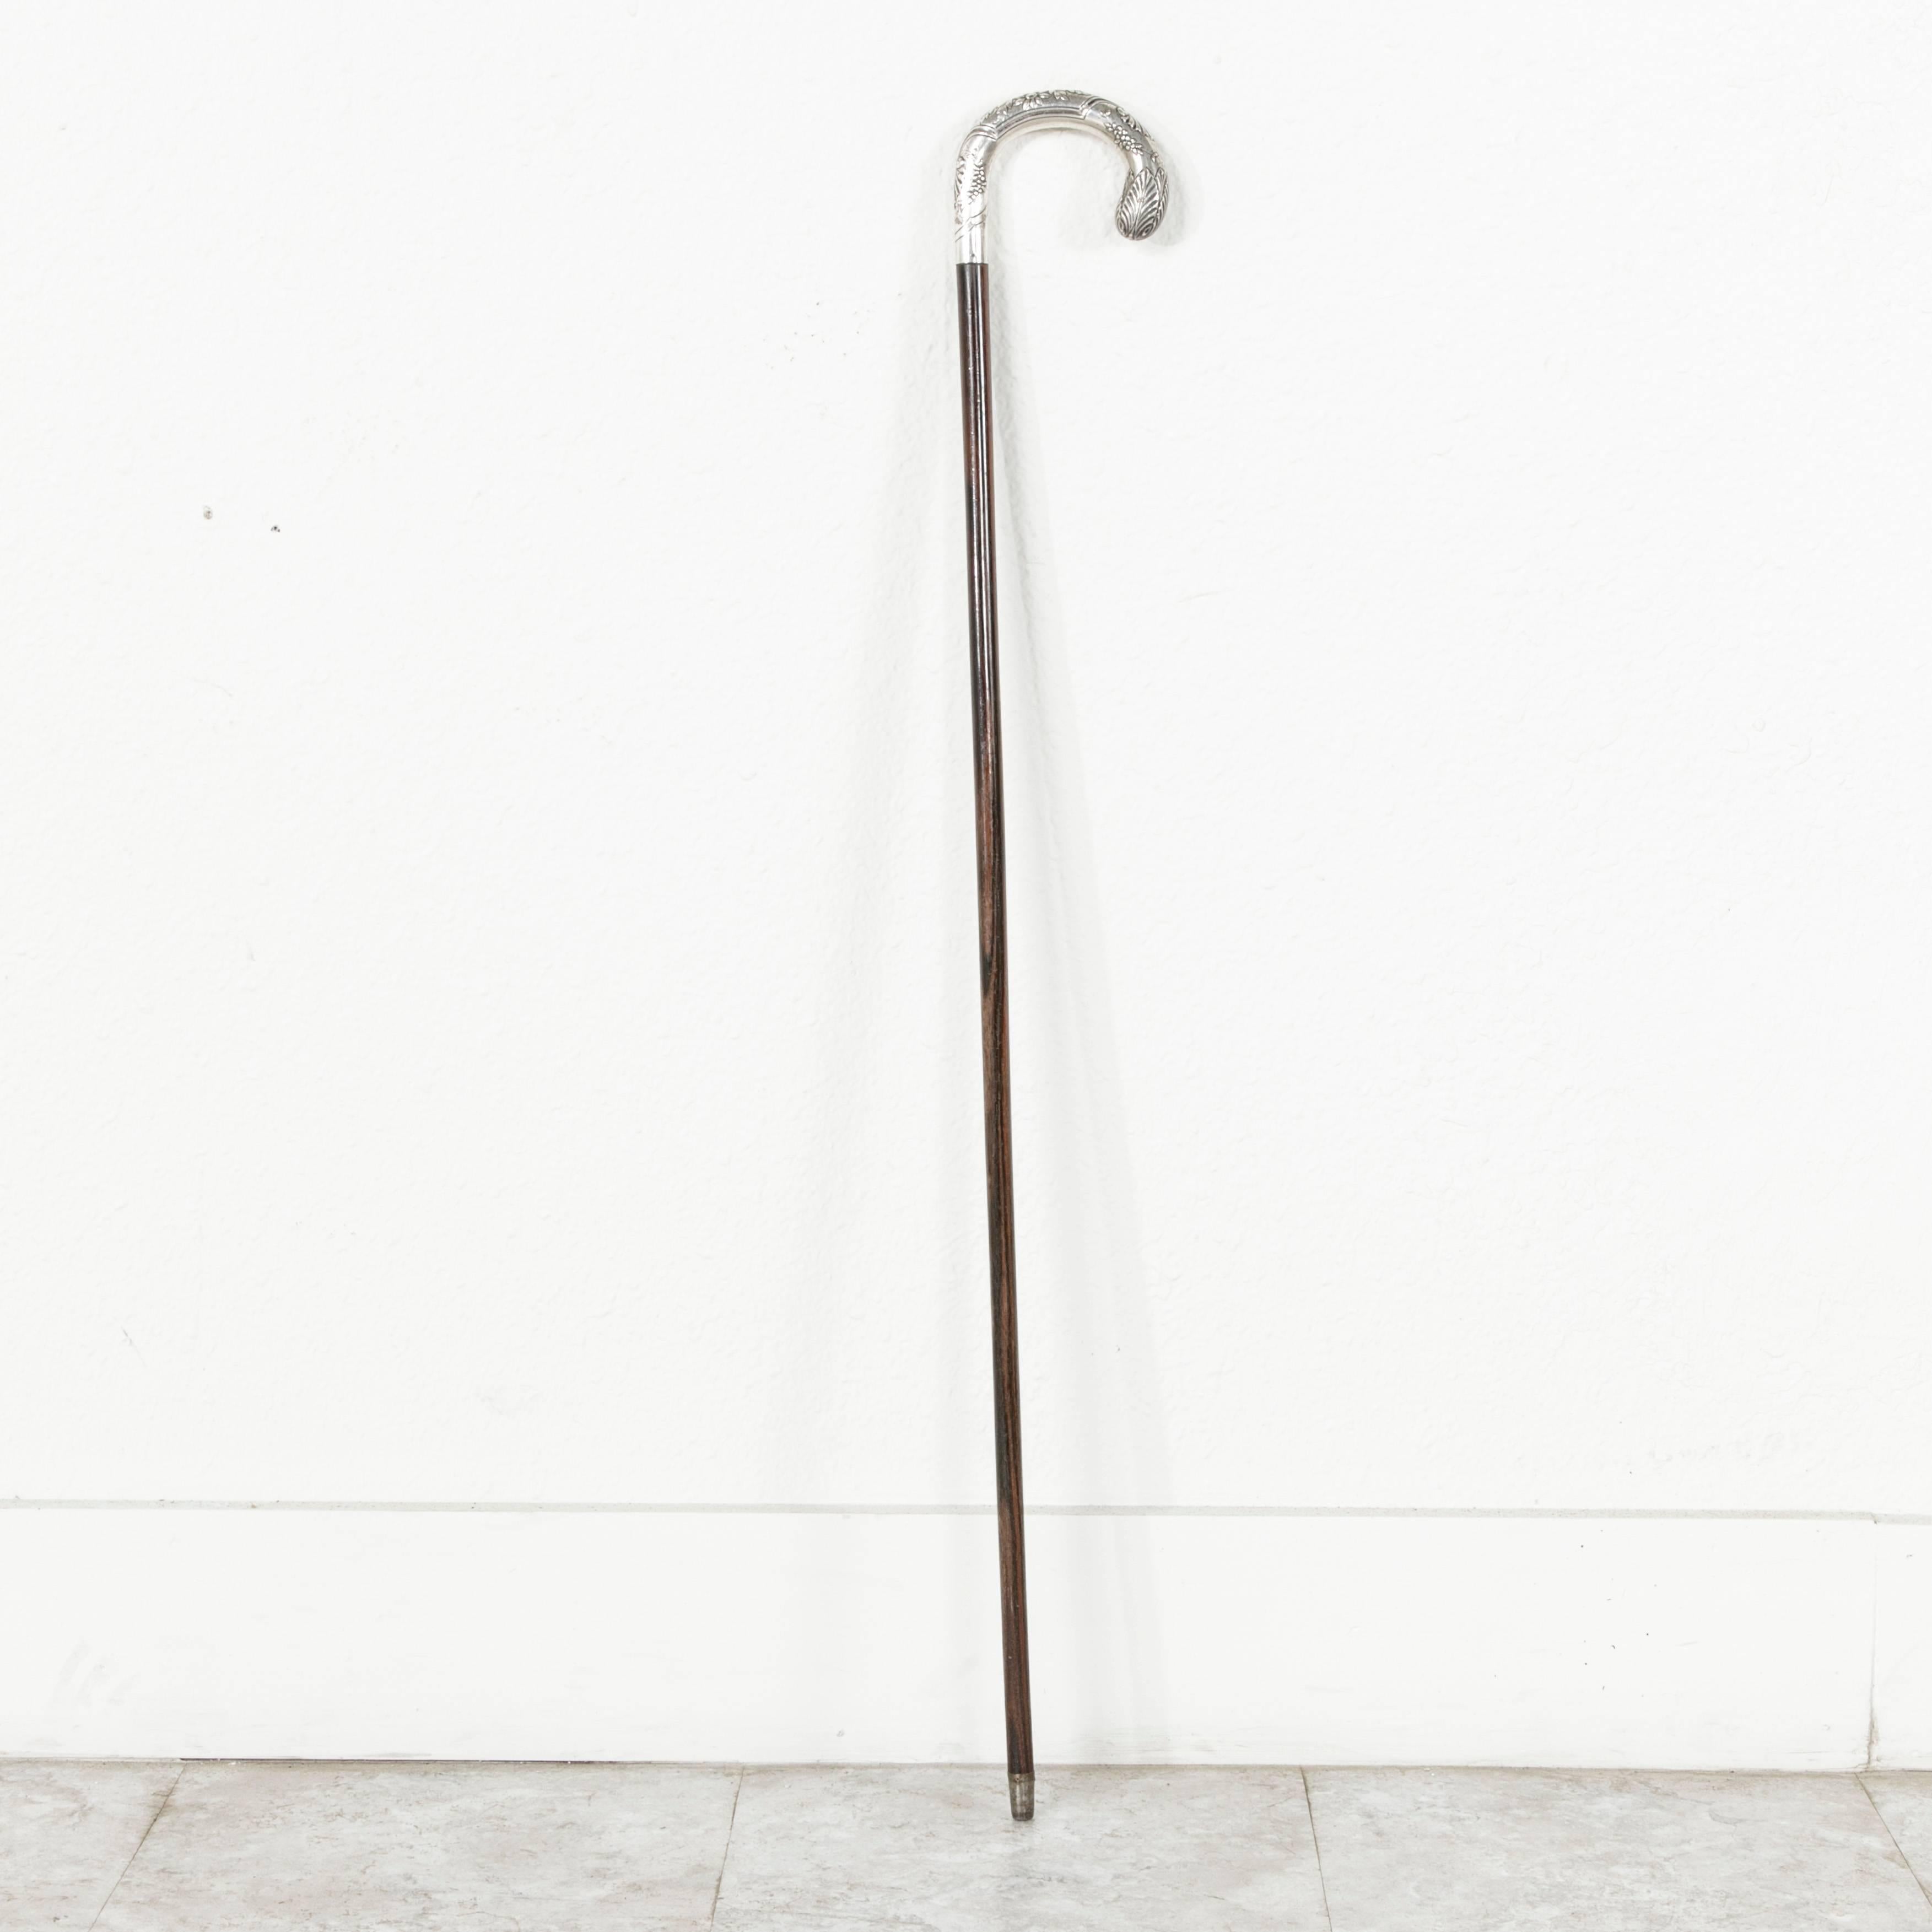 The elegant walking stick features a beautifully detailed silver plated handle with grapes and flowers. The slender palissander wooden stick has beautiful deeply contrasting heart grain lines, and it is tipped on the bottom with silver to protect